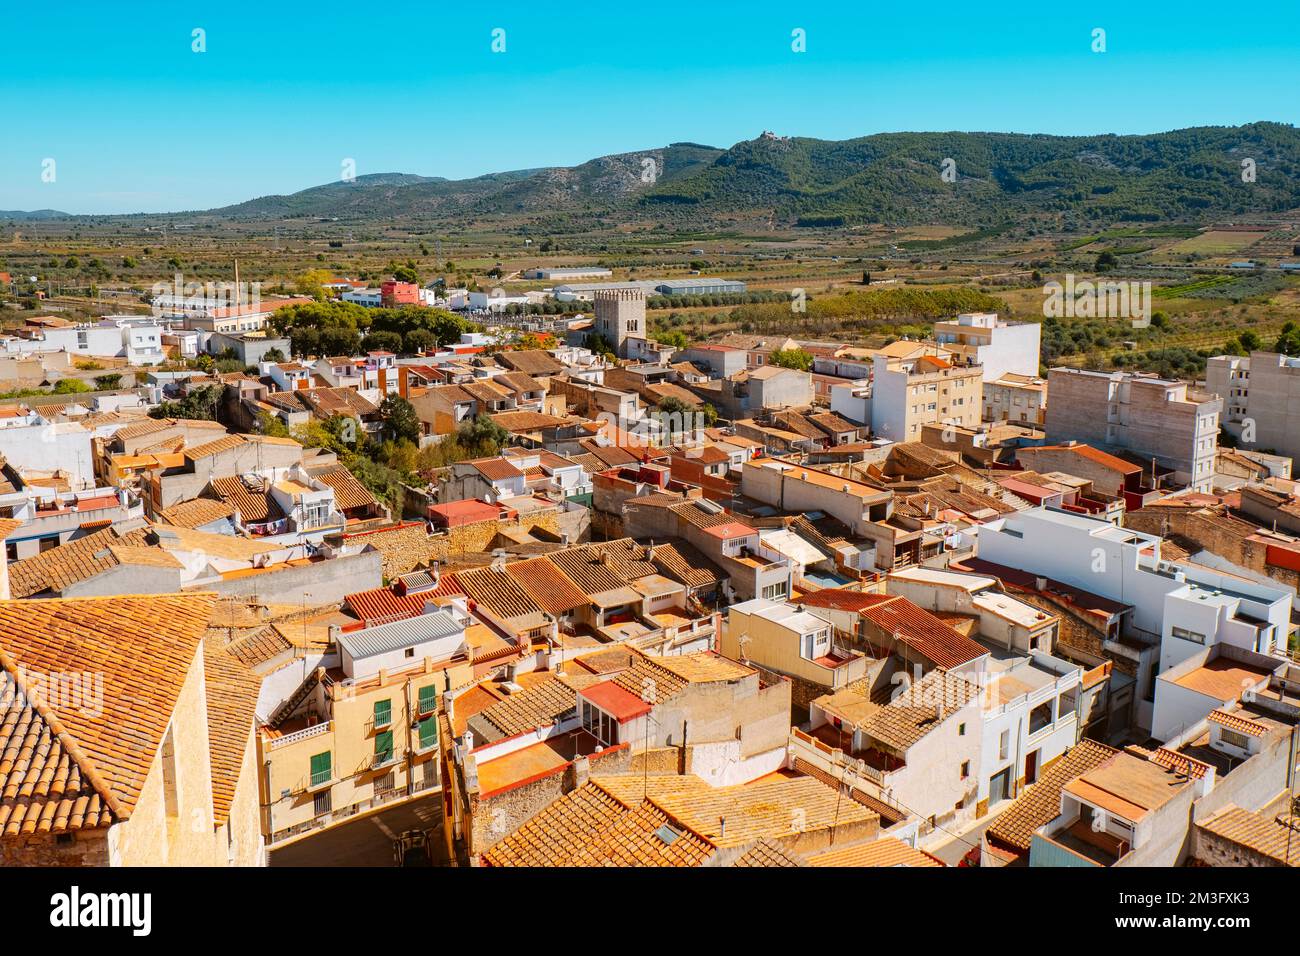 an aerial view of the old town of Alcala de Xivert, in the province of Castellon, int the Valencian Community, Spain Stock Photo